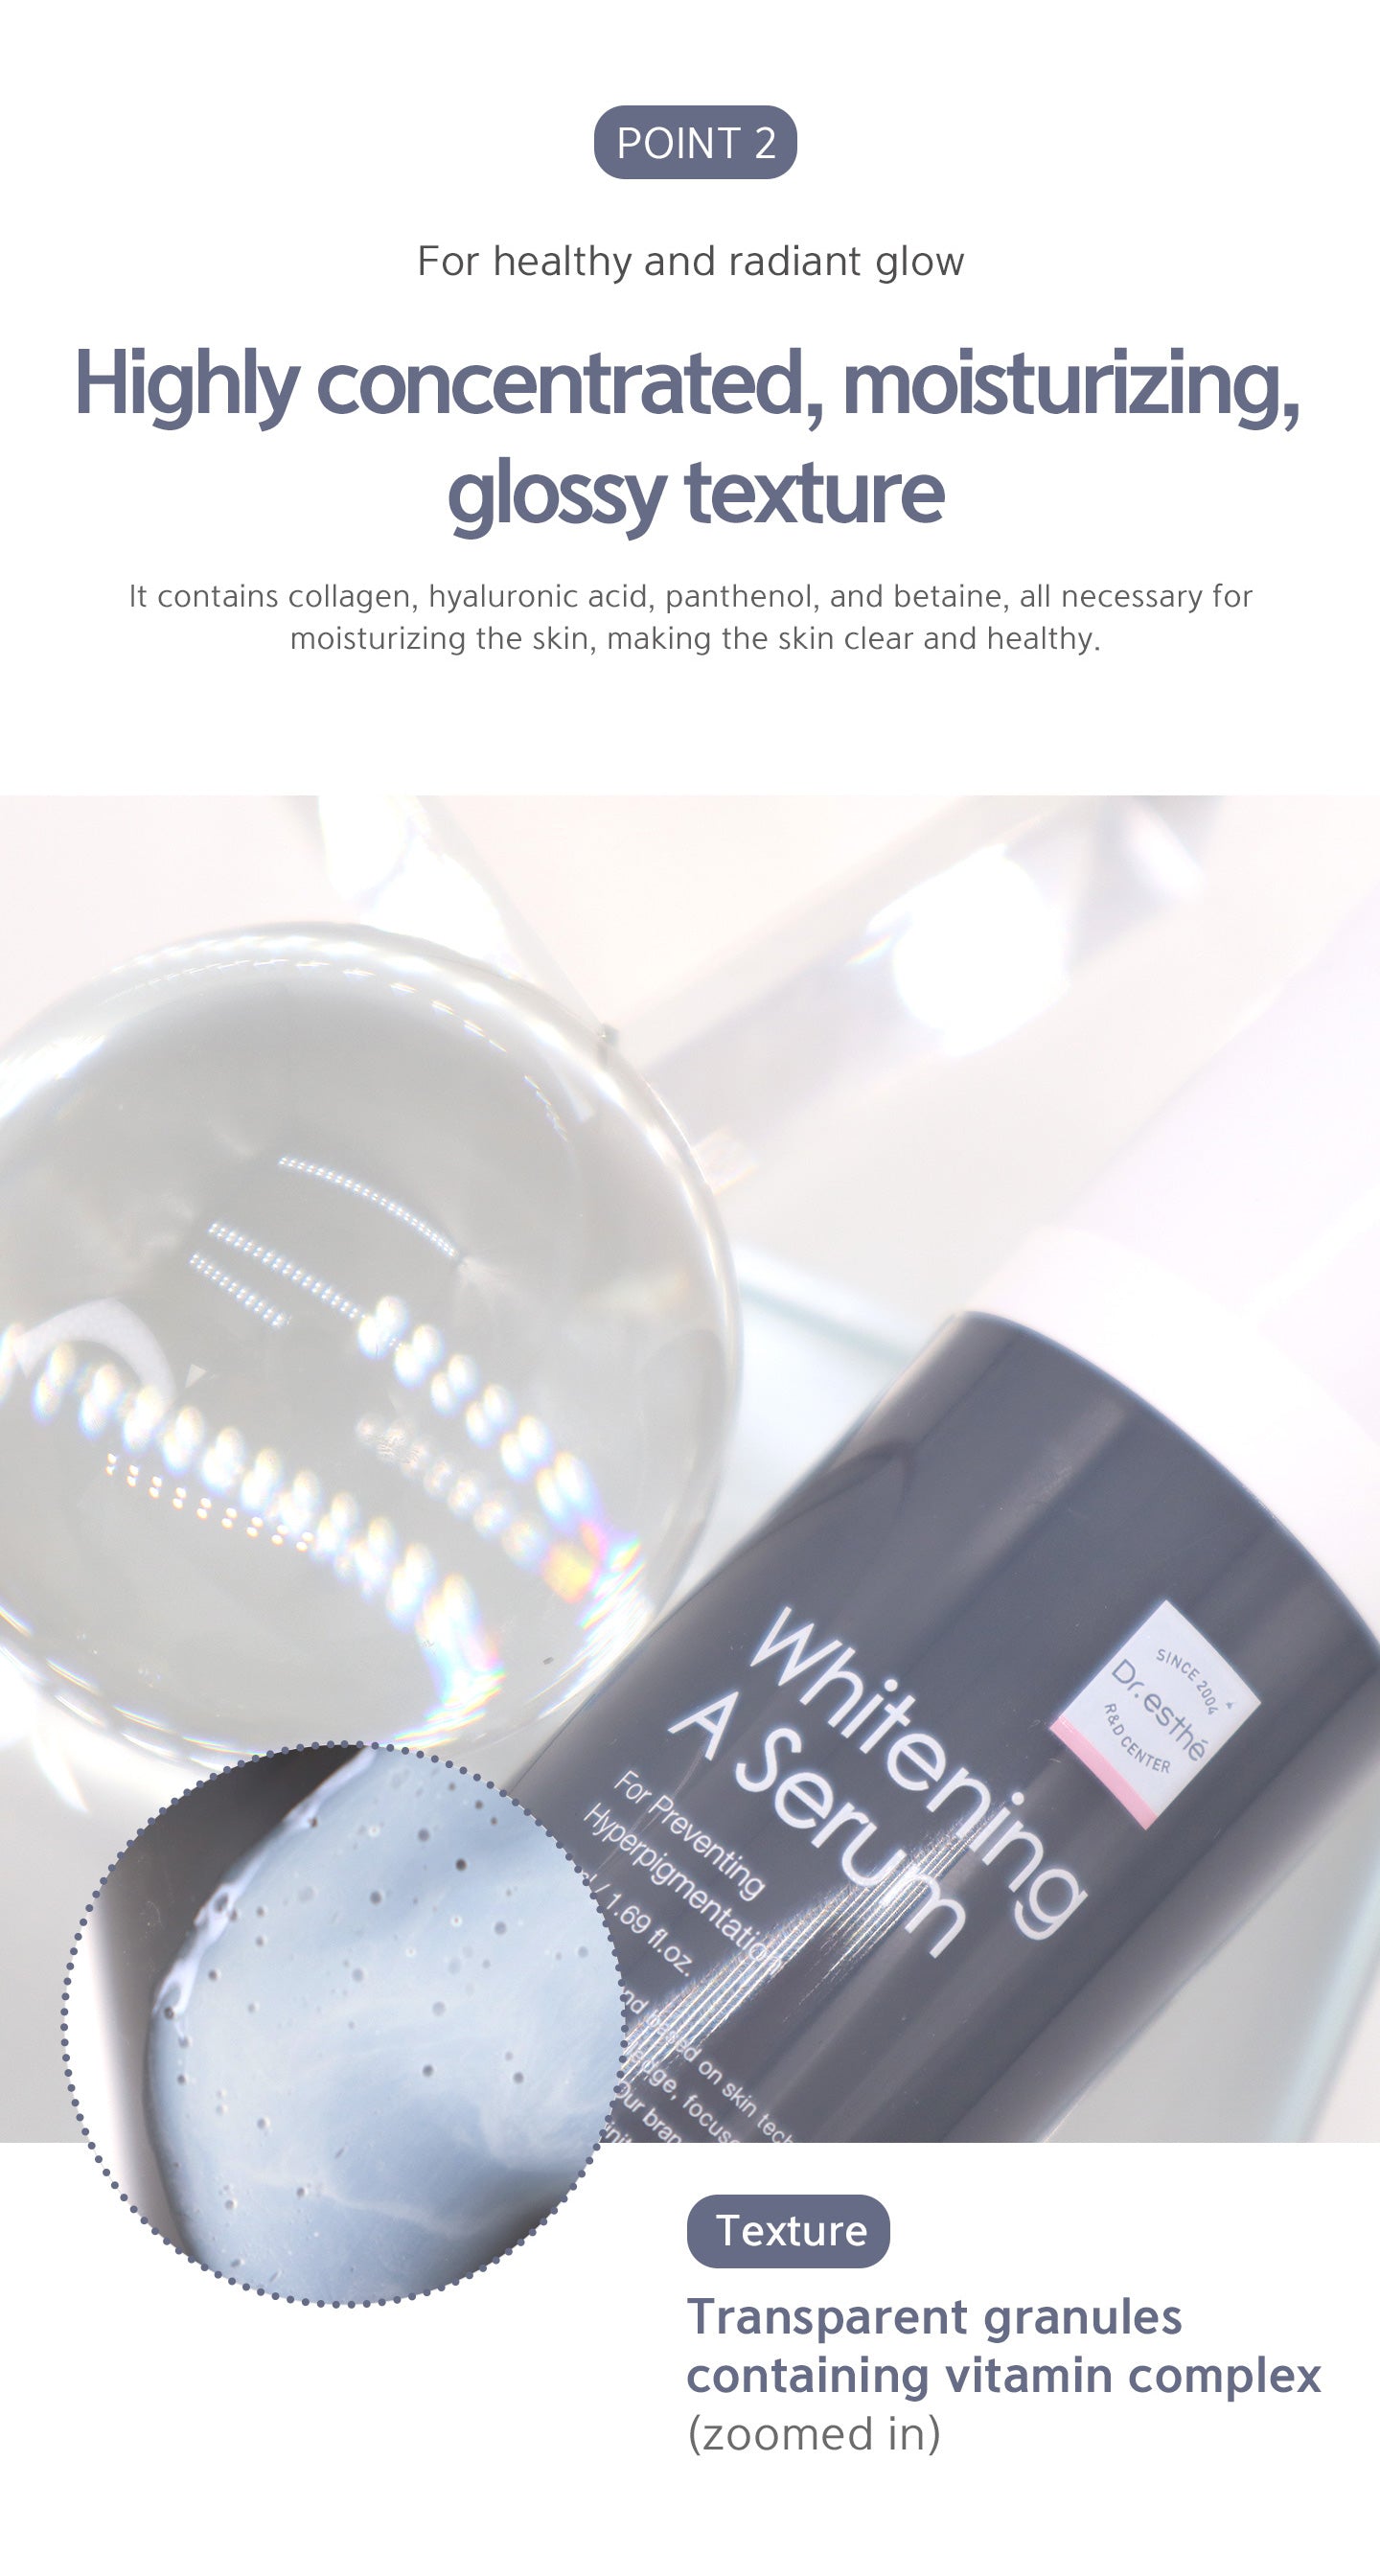 It contains collagen, hyaluronic acid, panthenol, and bataine, all necessary for moisturizing the skin, making the skin clear and healthy. Dr.esthe Whitening A Serum.